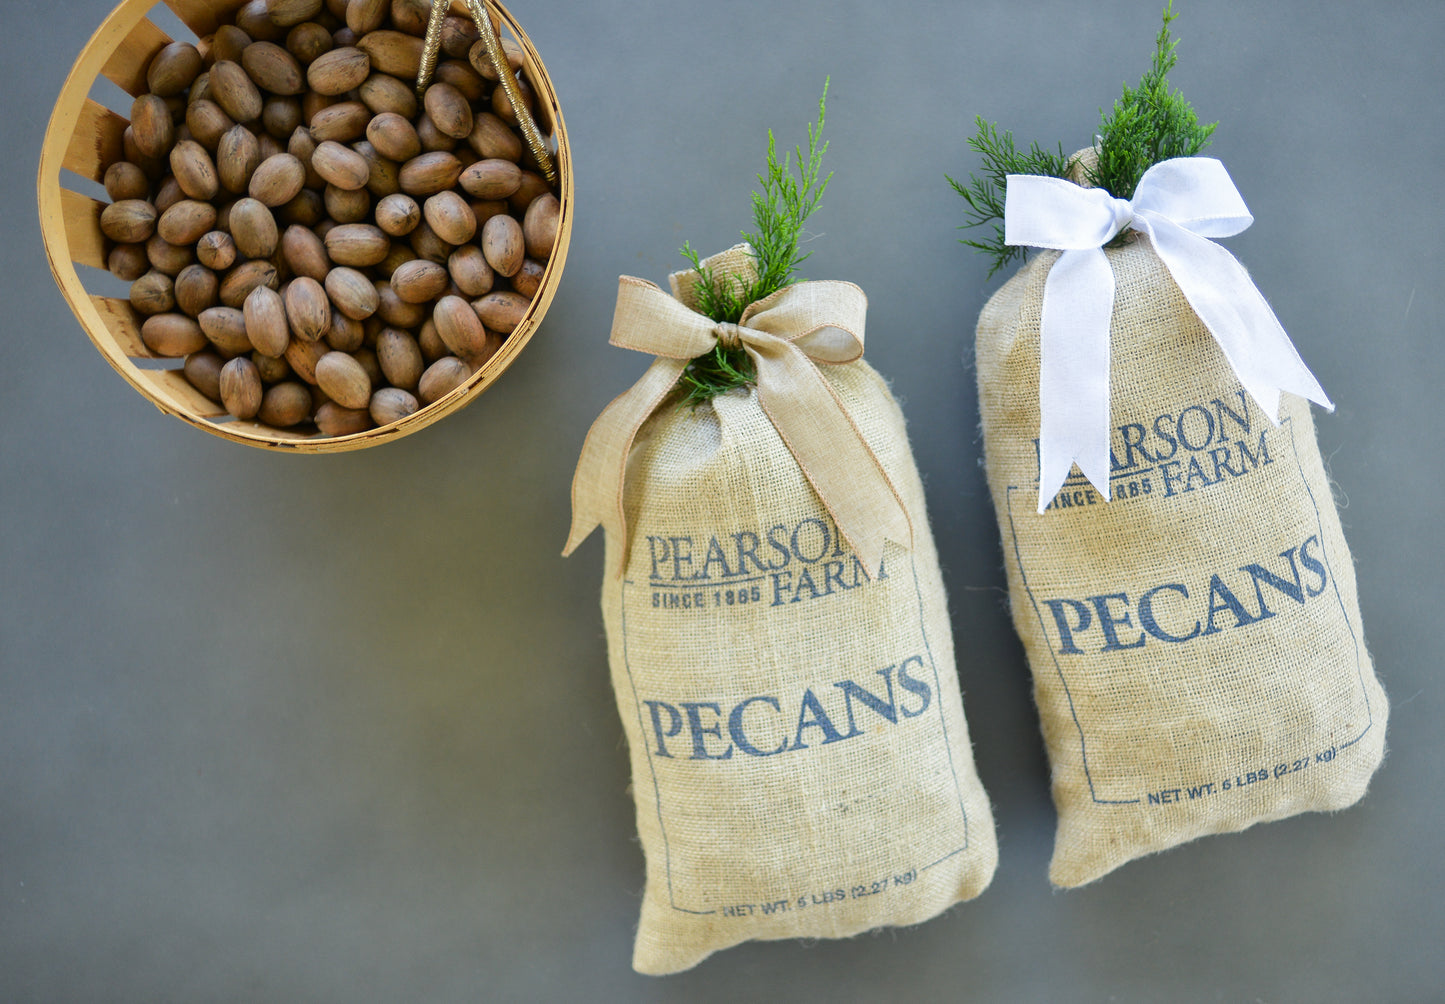 In-Shell Pecan Subscription